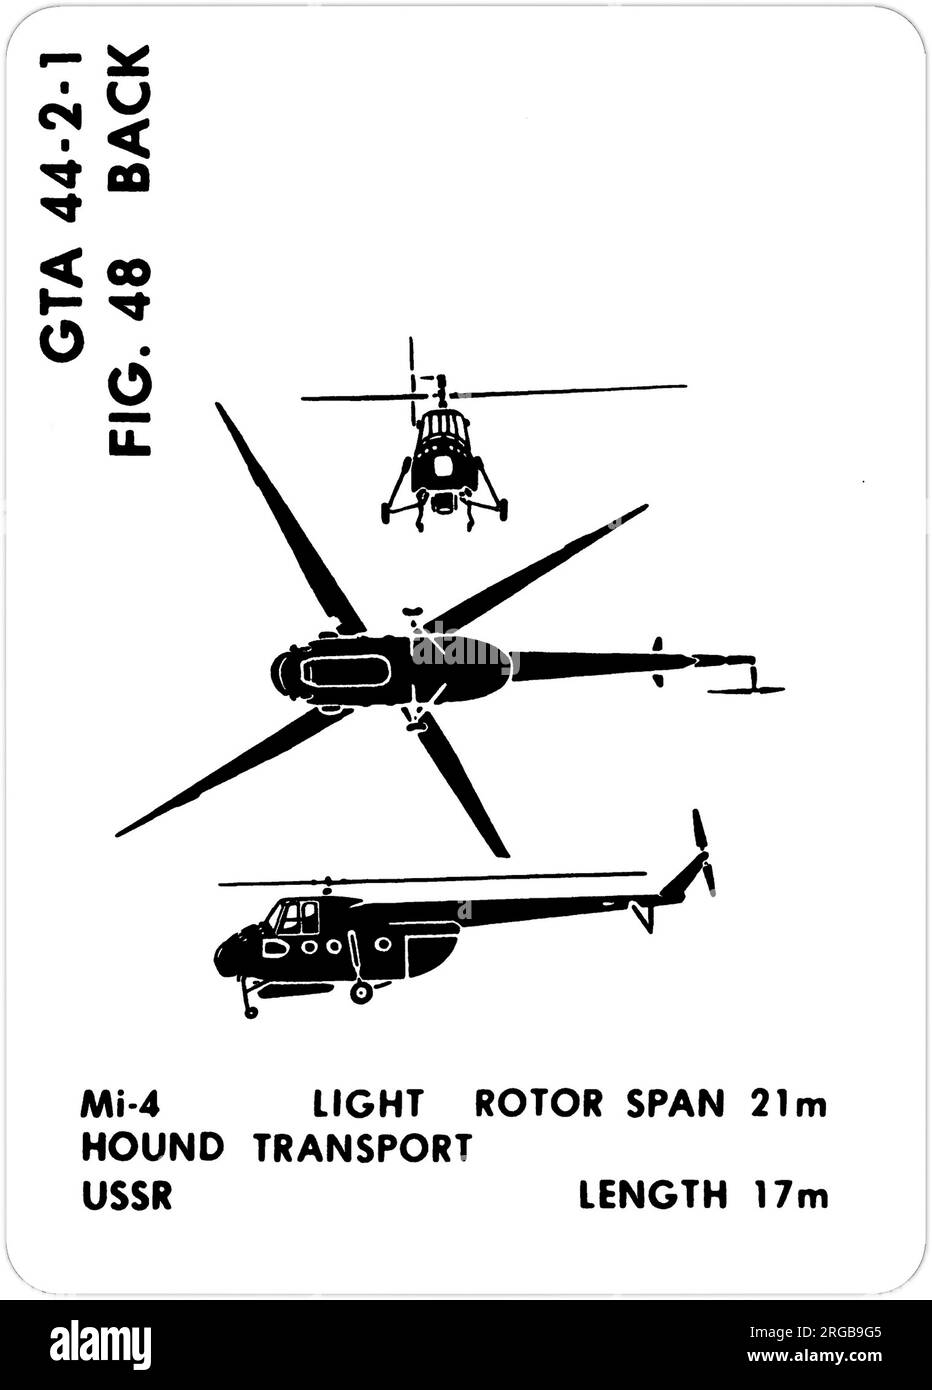 Mil Mi-4 (NATO codename: Hound). This is one of the series of Graphics Training Aids (GTA) used by the United States Army to train their personnel to recognize friendly and hostile aircraft. This particular set, GTA 44-2-1, was issued in July1977. The set features aircraft from: Canada, Italy, United Kingdom, United States, and the USSR. Stock Photo